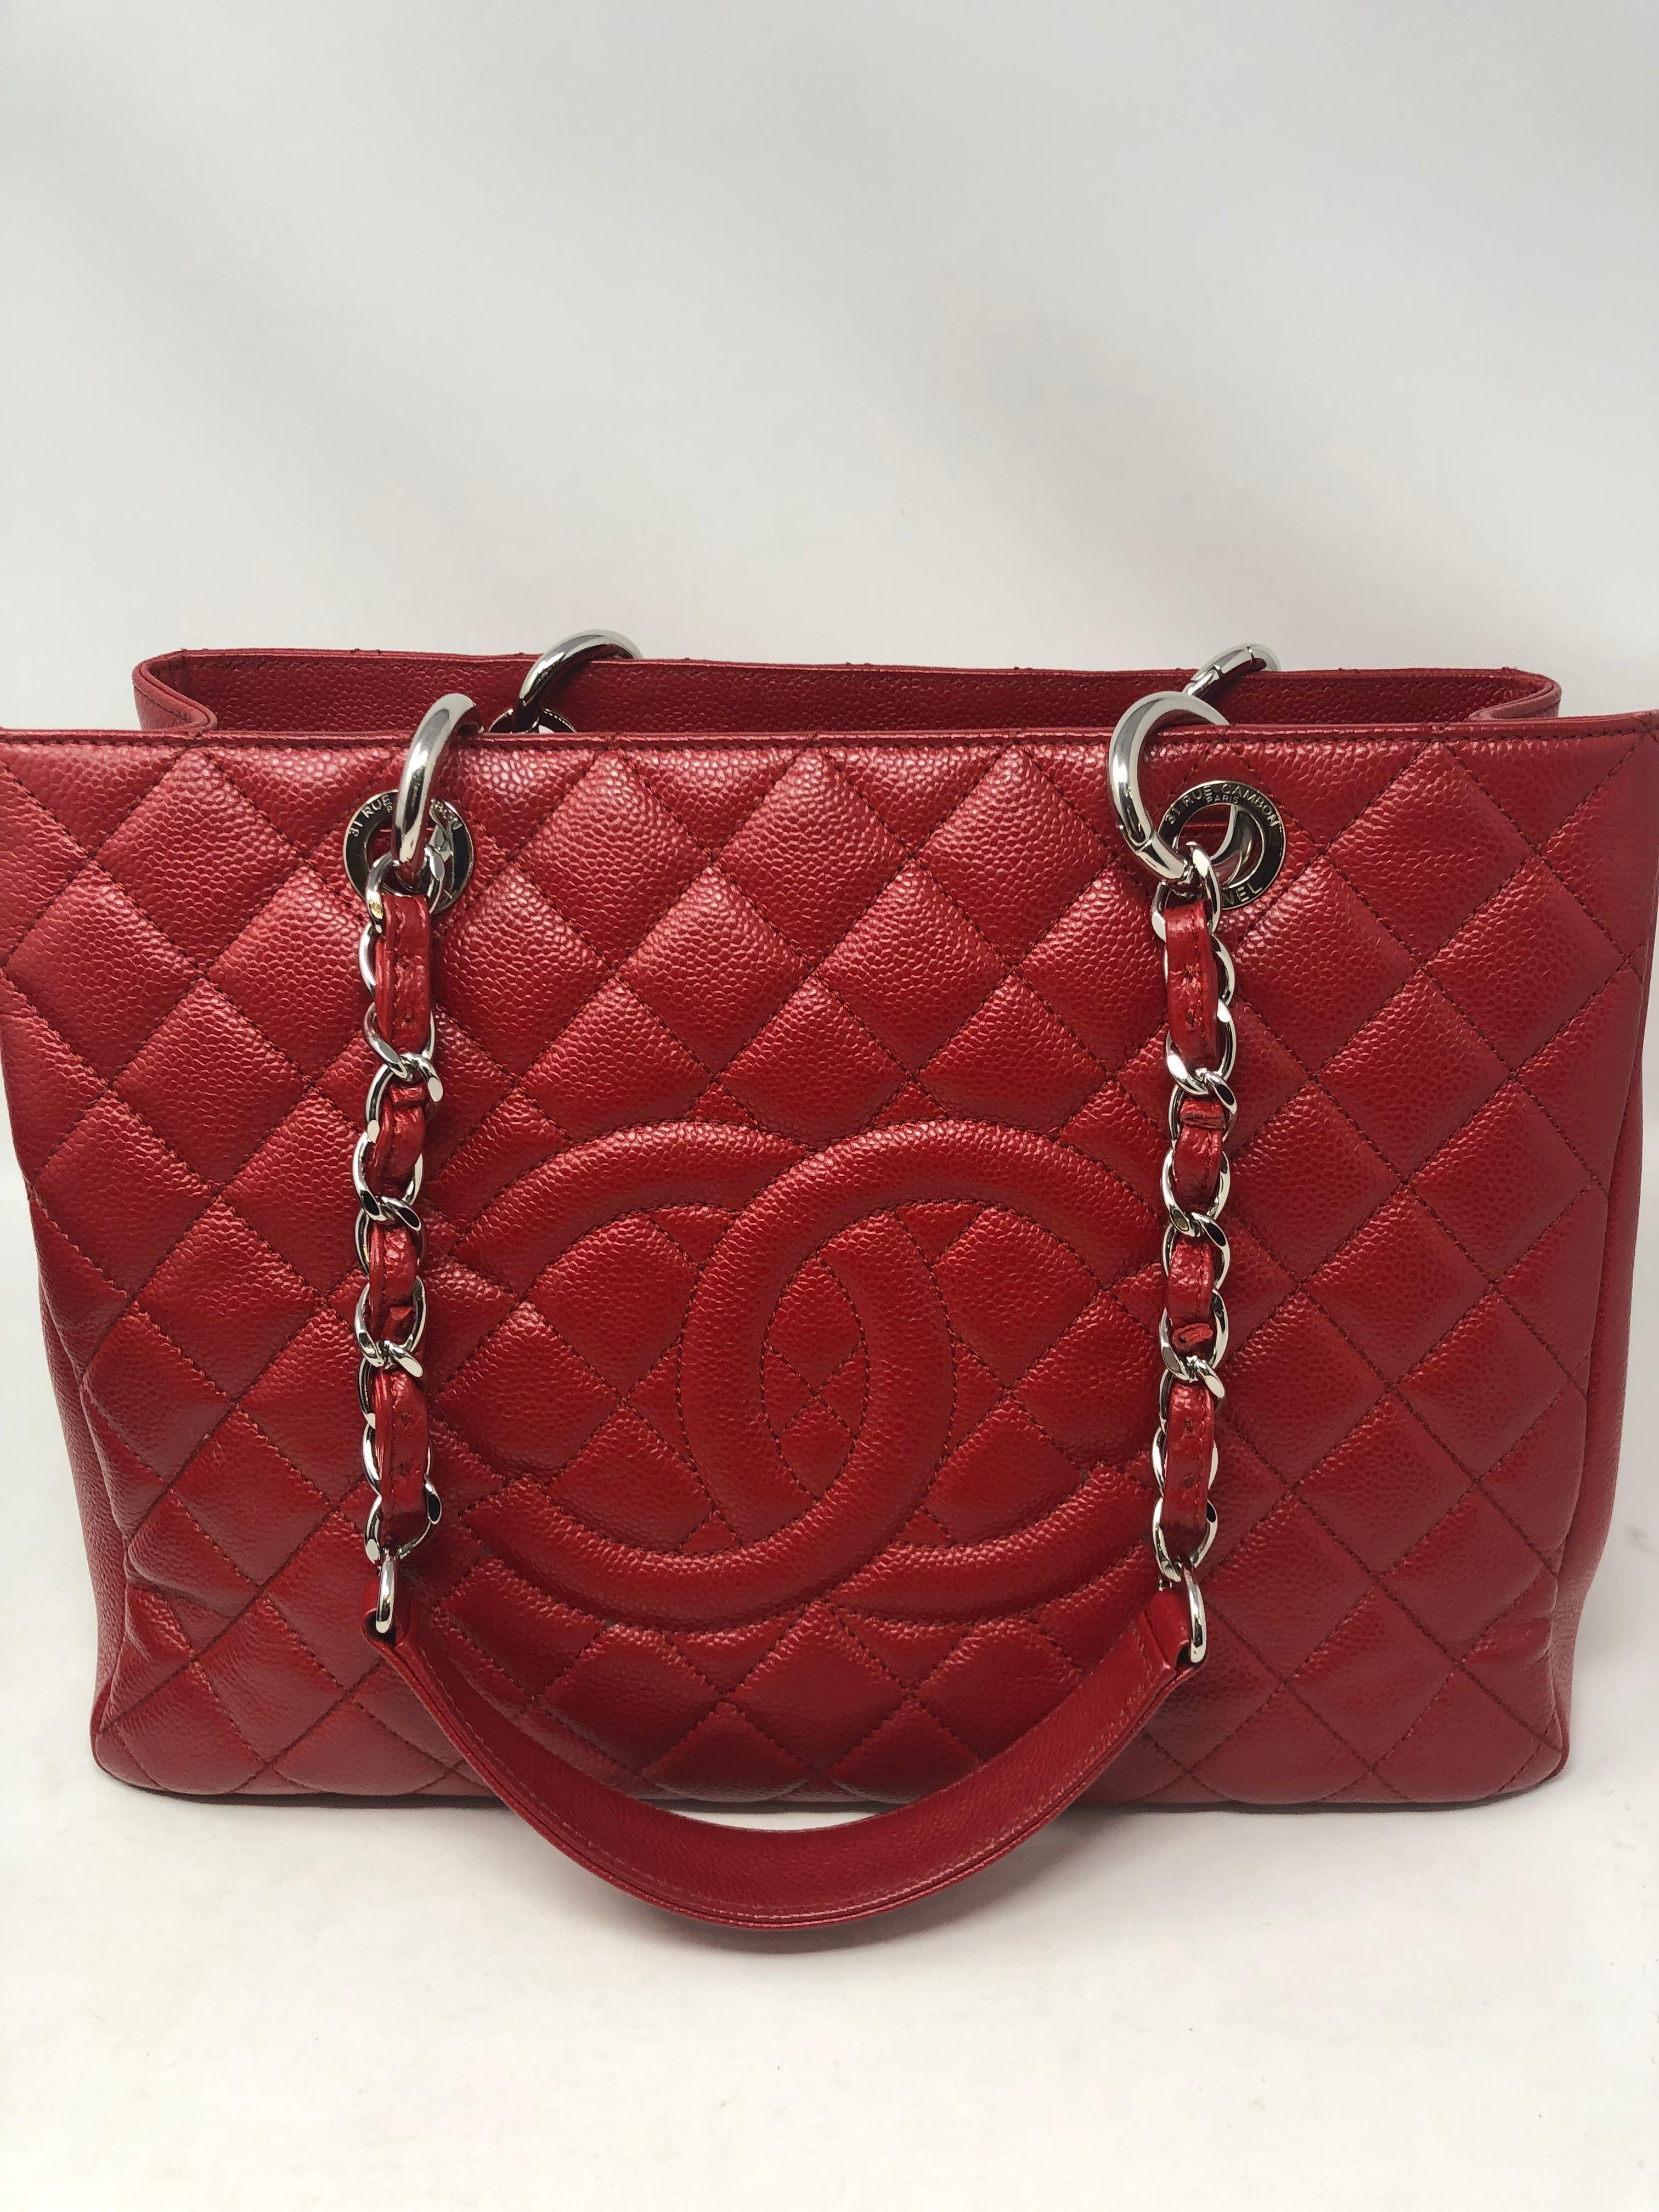 Chanel Red Caviar Leather Grand Shopper Tote. Silver hardware in excellent condition. Exterior is in like new condition. Beautiful and rare red color. GST bags are retired from Chanel so hard to find. Authenticity card included. Guaranteed